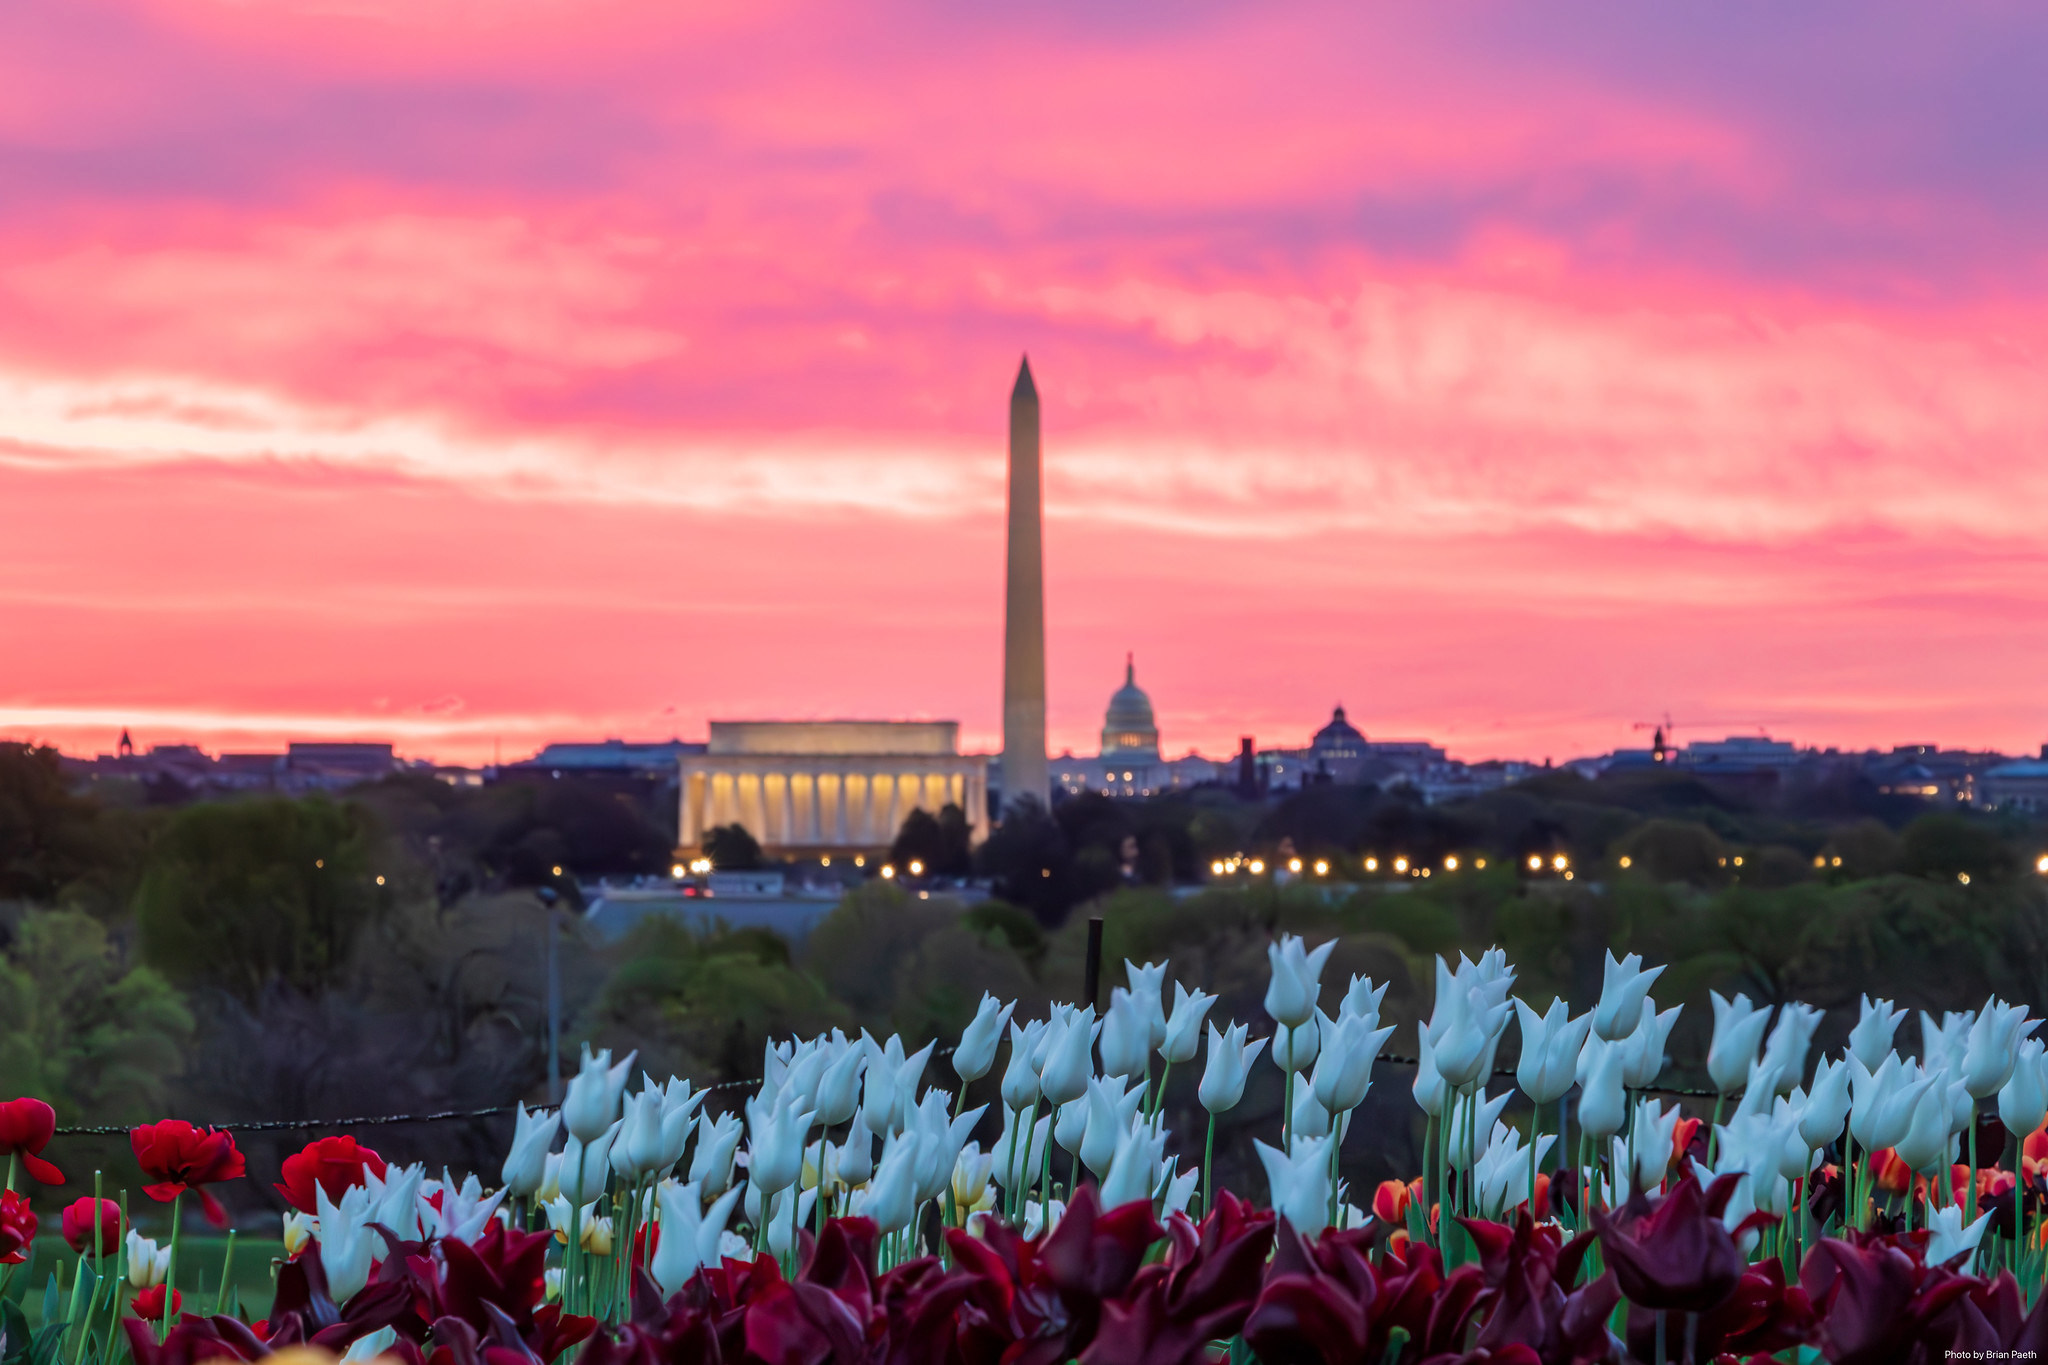 D.C.-area forecast: Warm today and tomorrow with a shot at 80 degrees